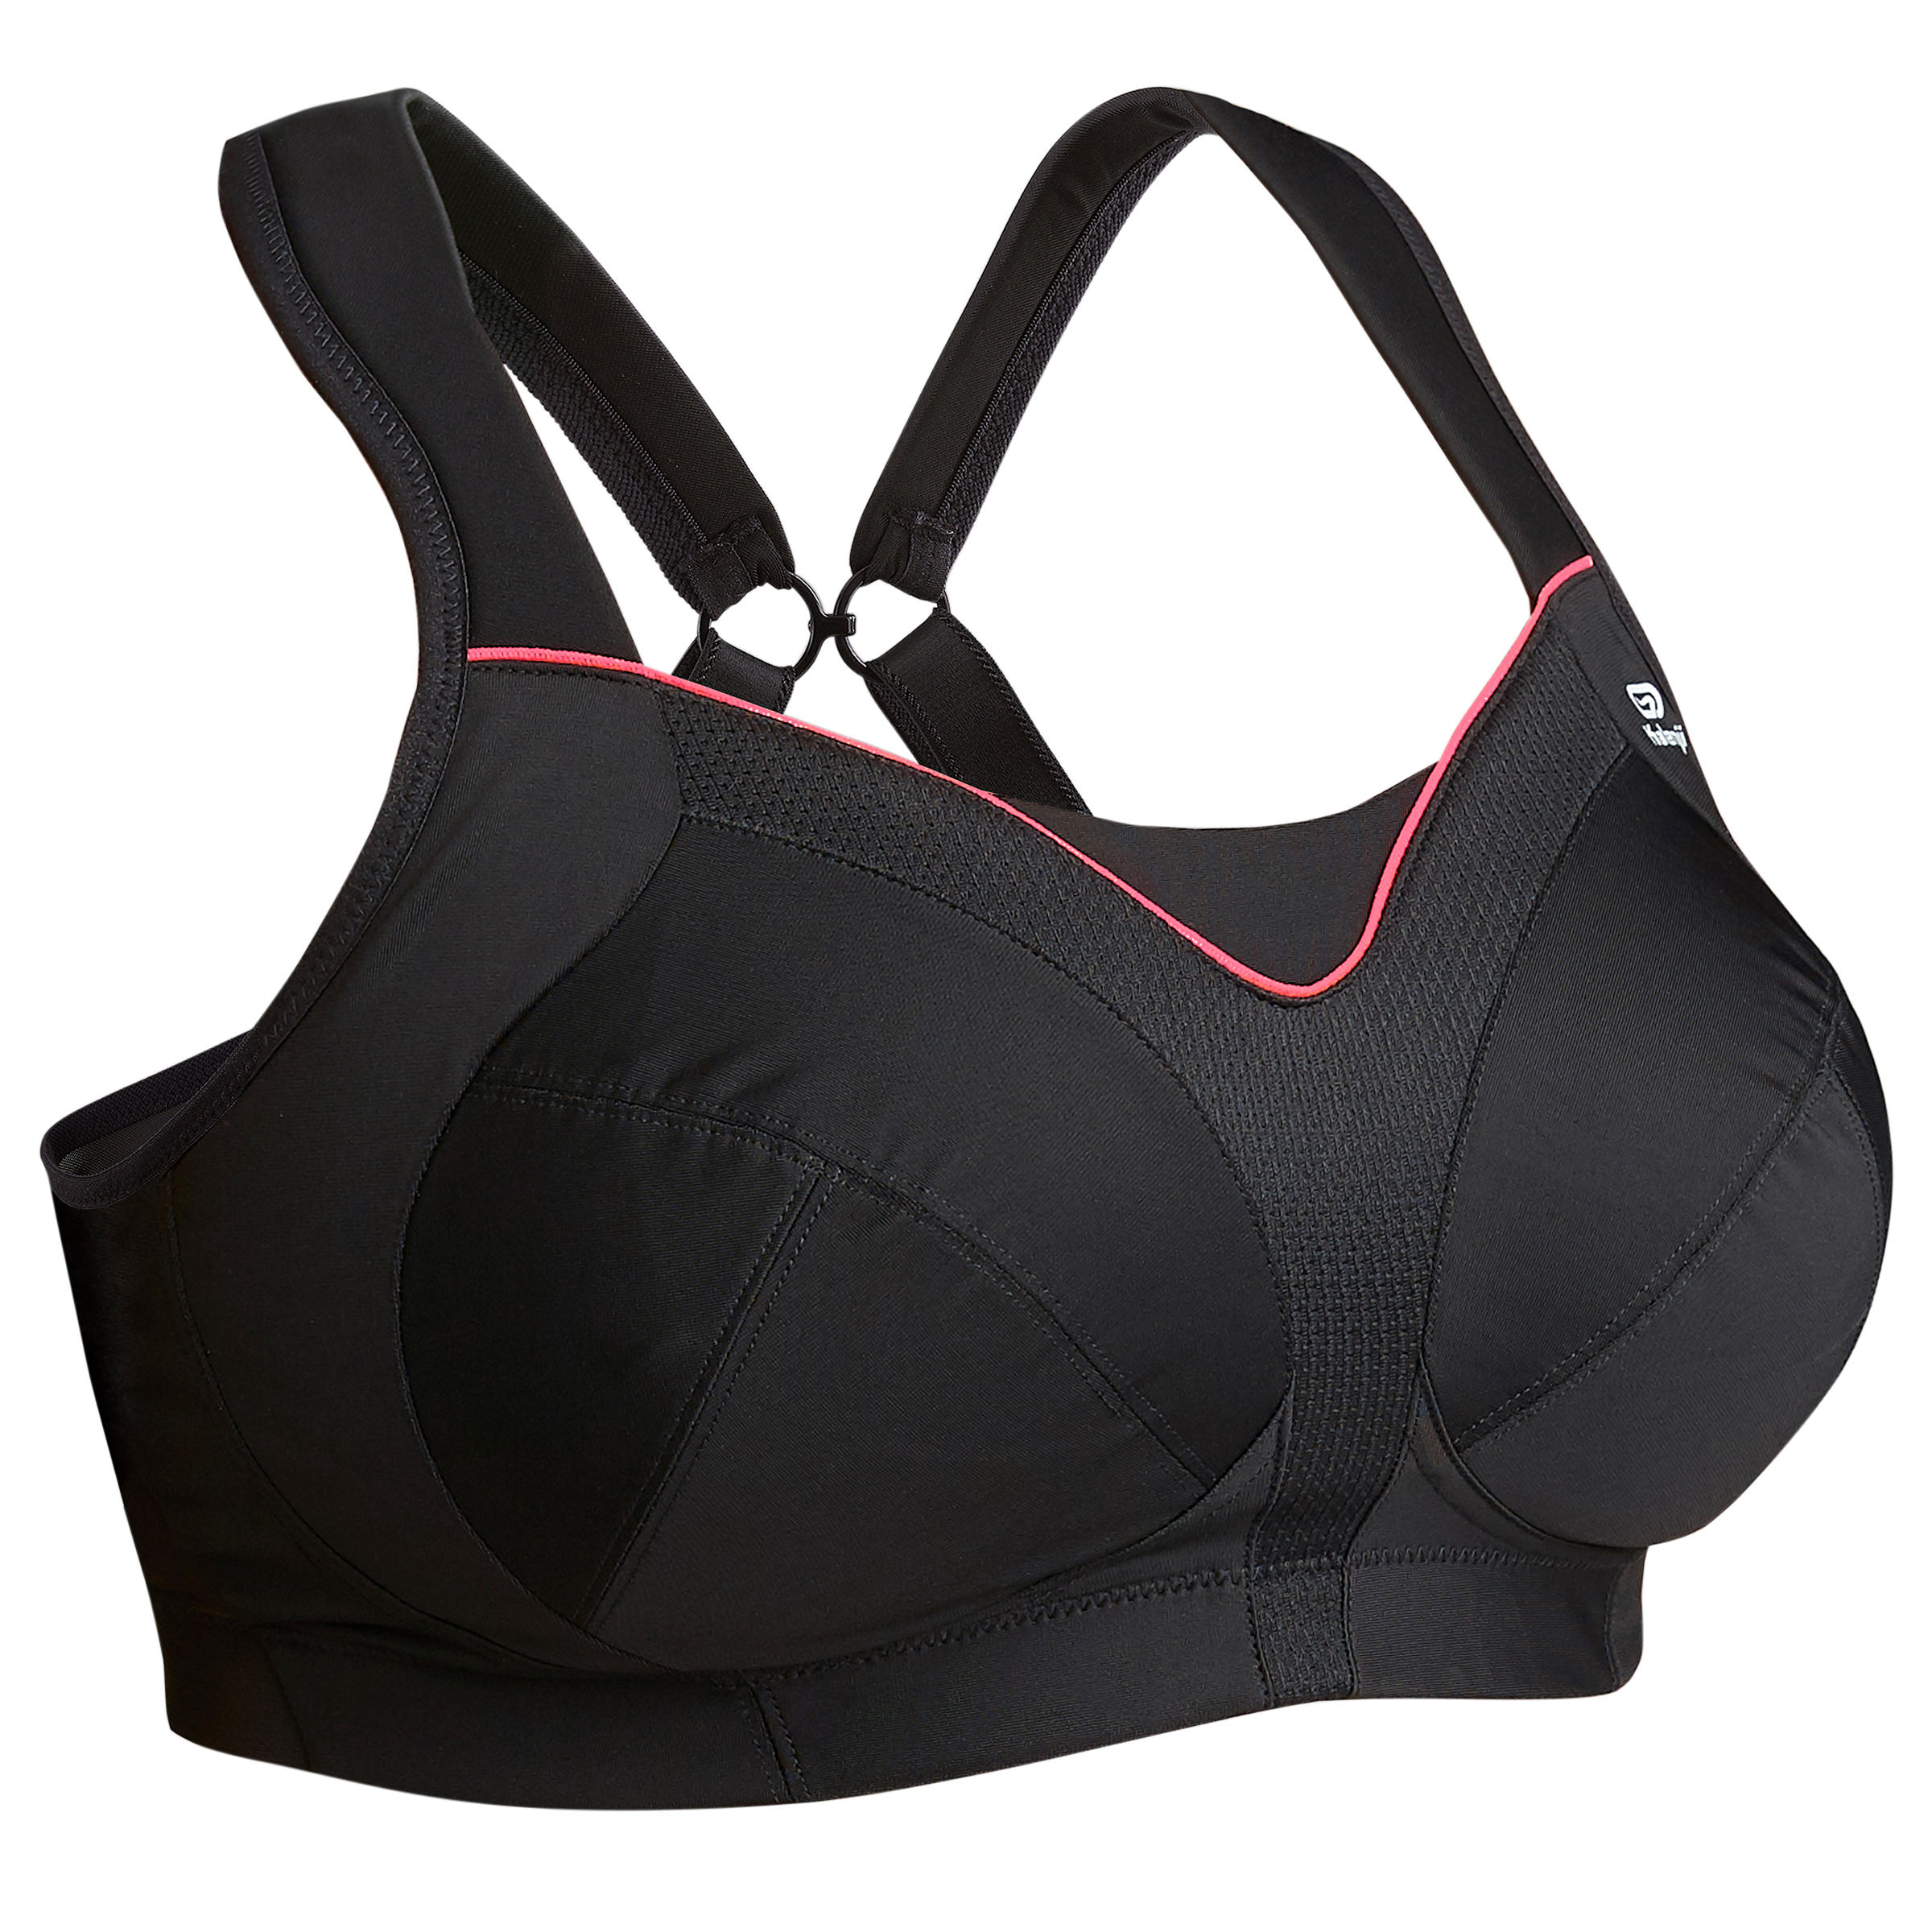 
RUNNING BRA
LARGE SIZE
BLACK WITH PINK CORAL DETAIL 2/11